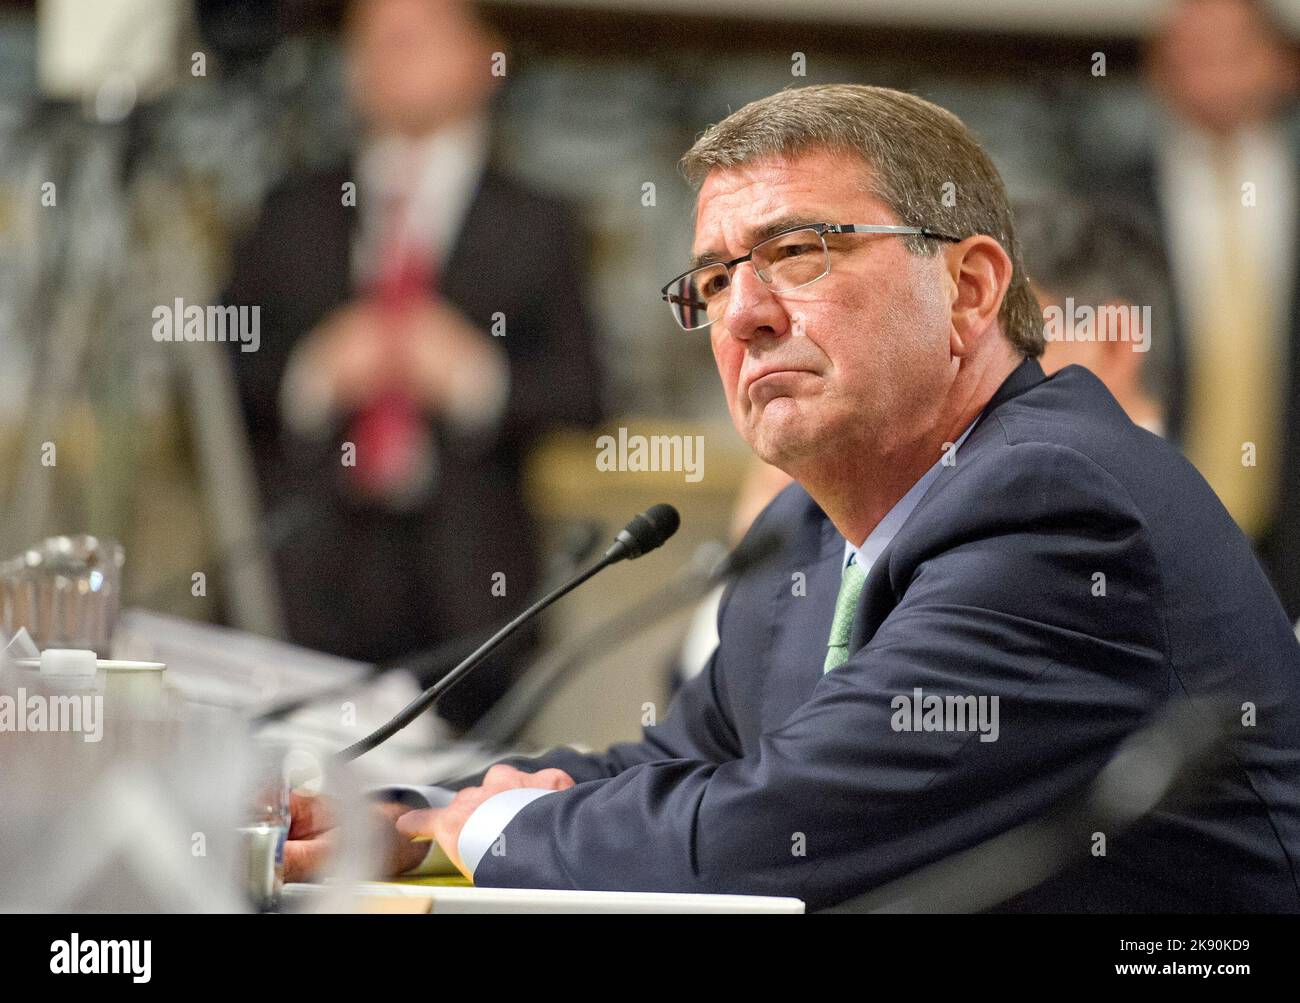 Washington, United States Of America. 29th July, 2015. United States Secretary of Defense Ashton Carter gives testimony before the US Senate Committee on Armed Services concerning 'Impacts of the Joint Comprehensive Plan of Action (JCPOA) on U.S. Interests and the Military Balance in the Middle East' on Capitol Hill on Wednesday, July 29, 2015.Credit: Ron Sachs/CNP/Sipa USA Credit: Sipa USA/Alamy Live News Stock Photo